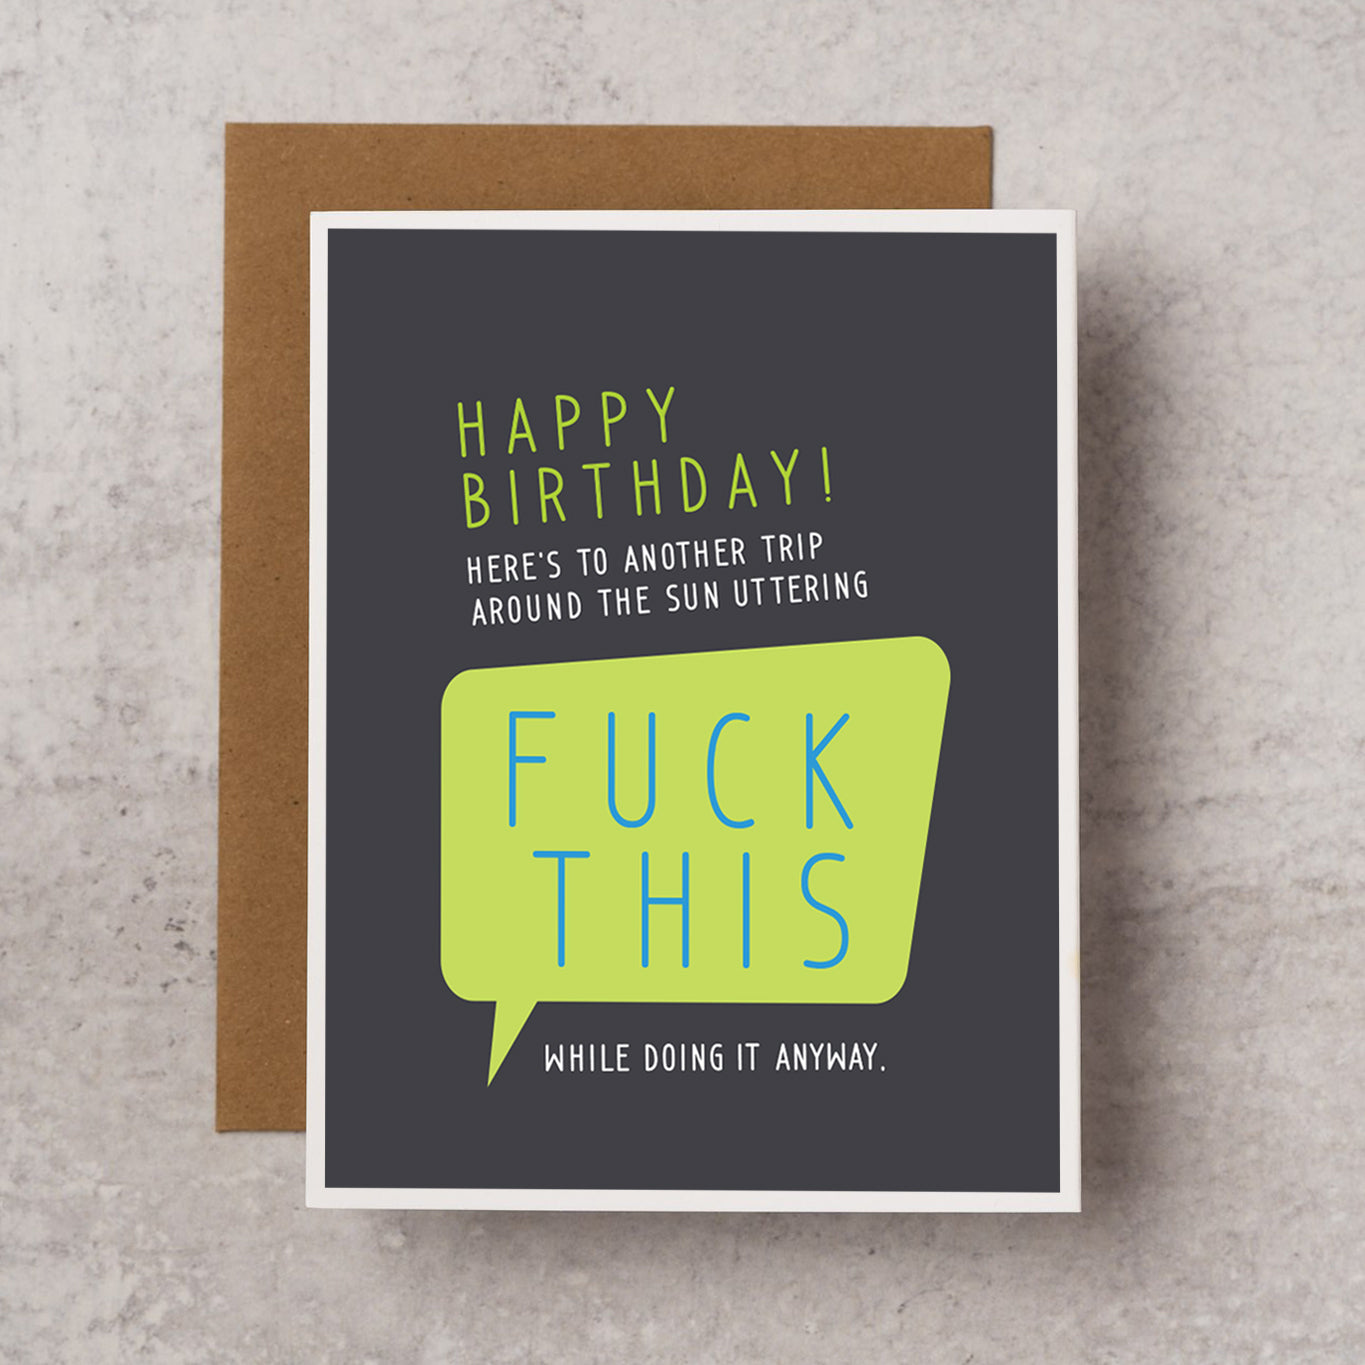 A unique and funny birthday card that reads "Happy Birthday! Here's to another trip around the sun uttering FUCK THIS while doing it anyway"